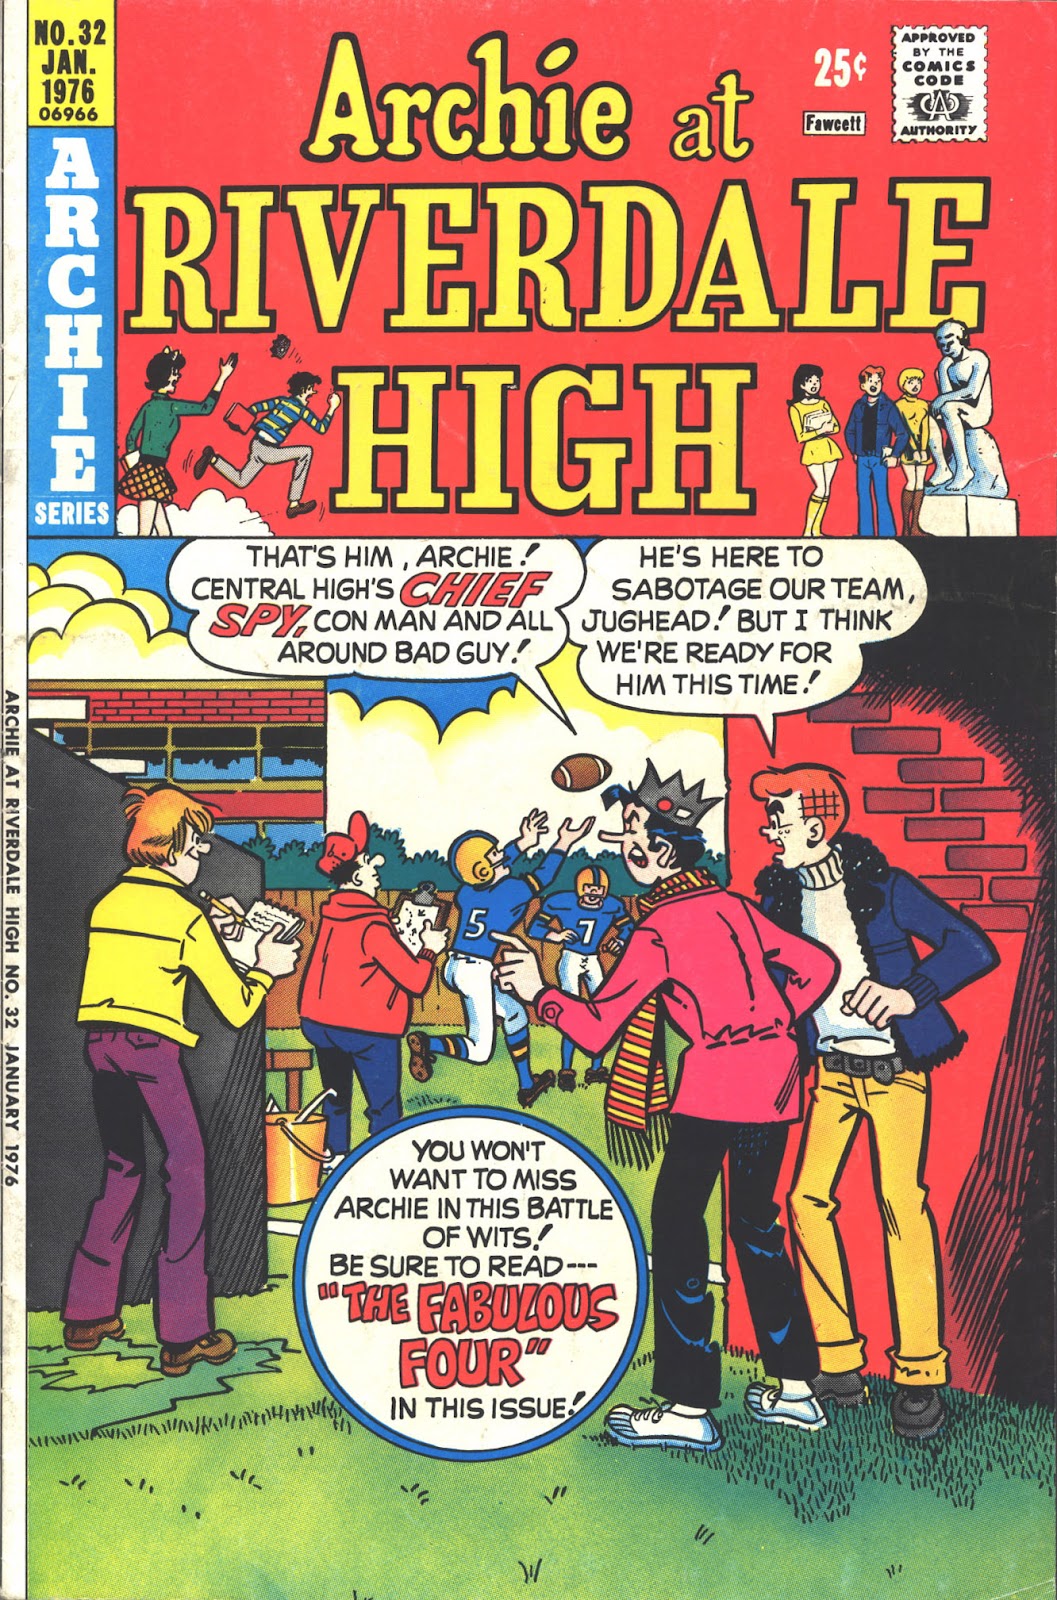 Archie at Riverdale High (1972) issue 32 - Page 1